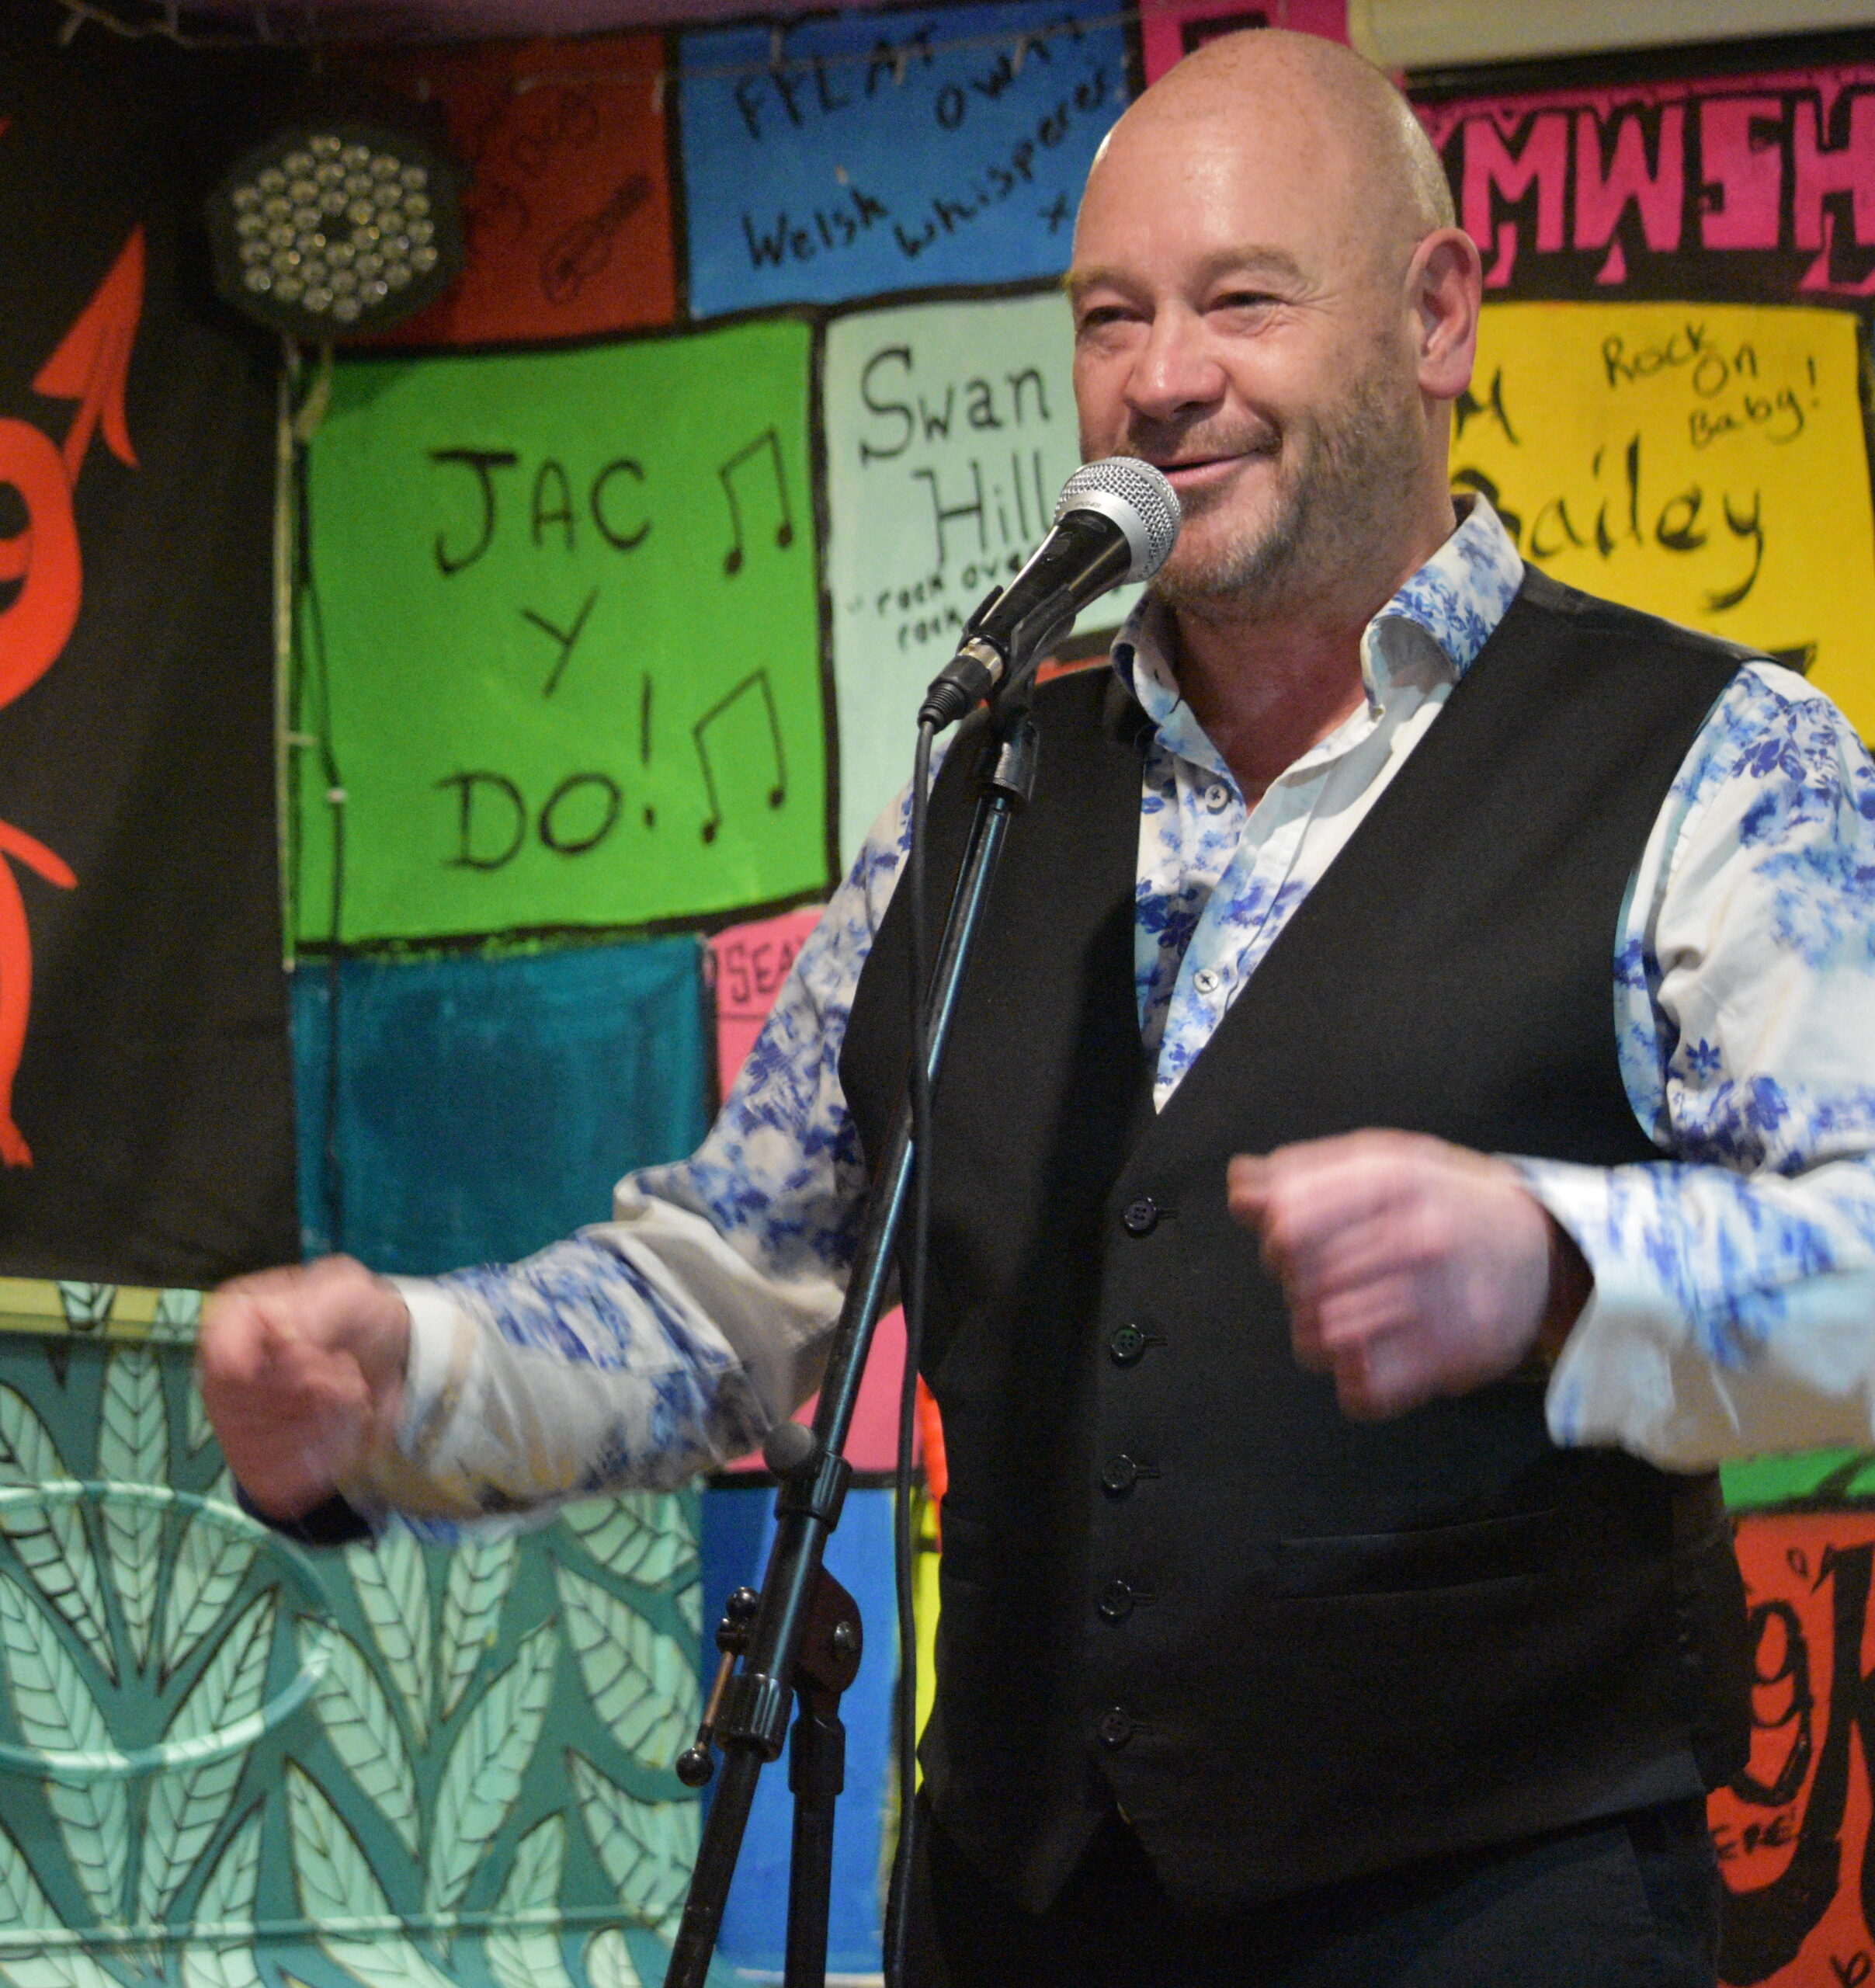 A bald man wearing a brightly patterned long sleeve shirt and dark waistcoat standing in front of a microphone. The background is colourful posters.